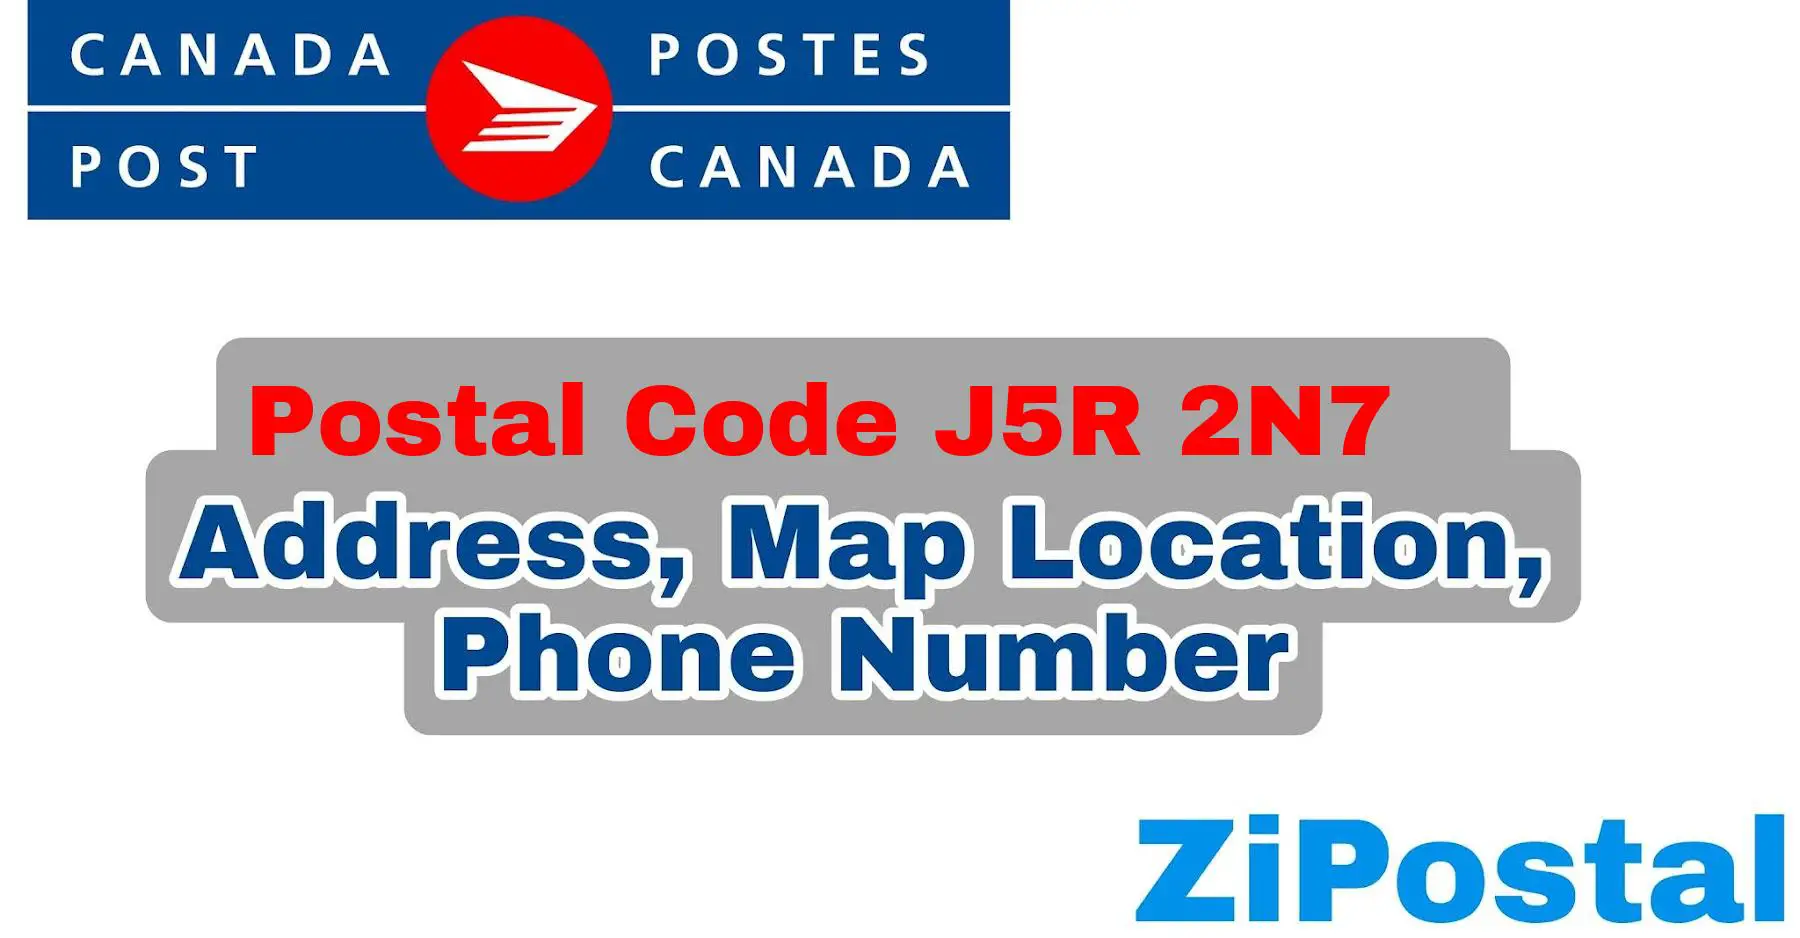 Postal Code J5R 2N7 Address Map Location and Phone Number